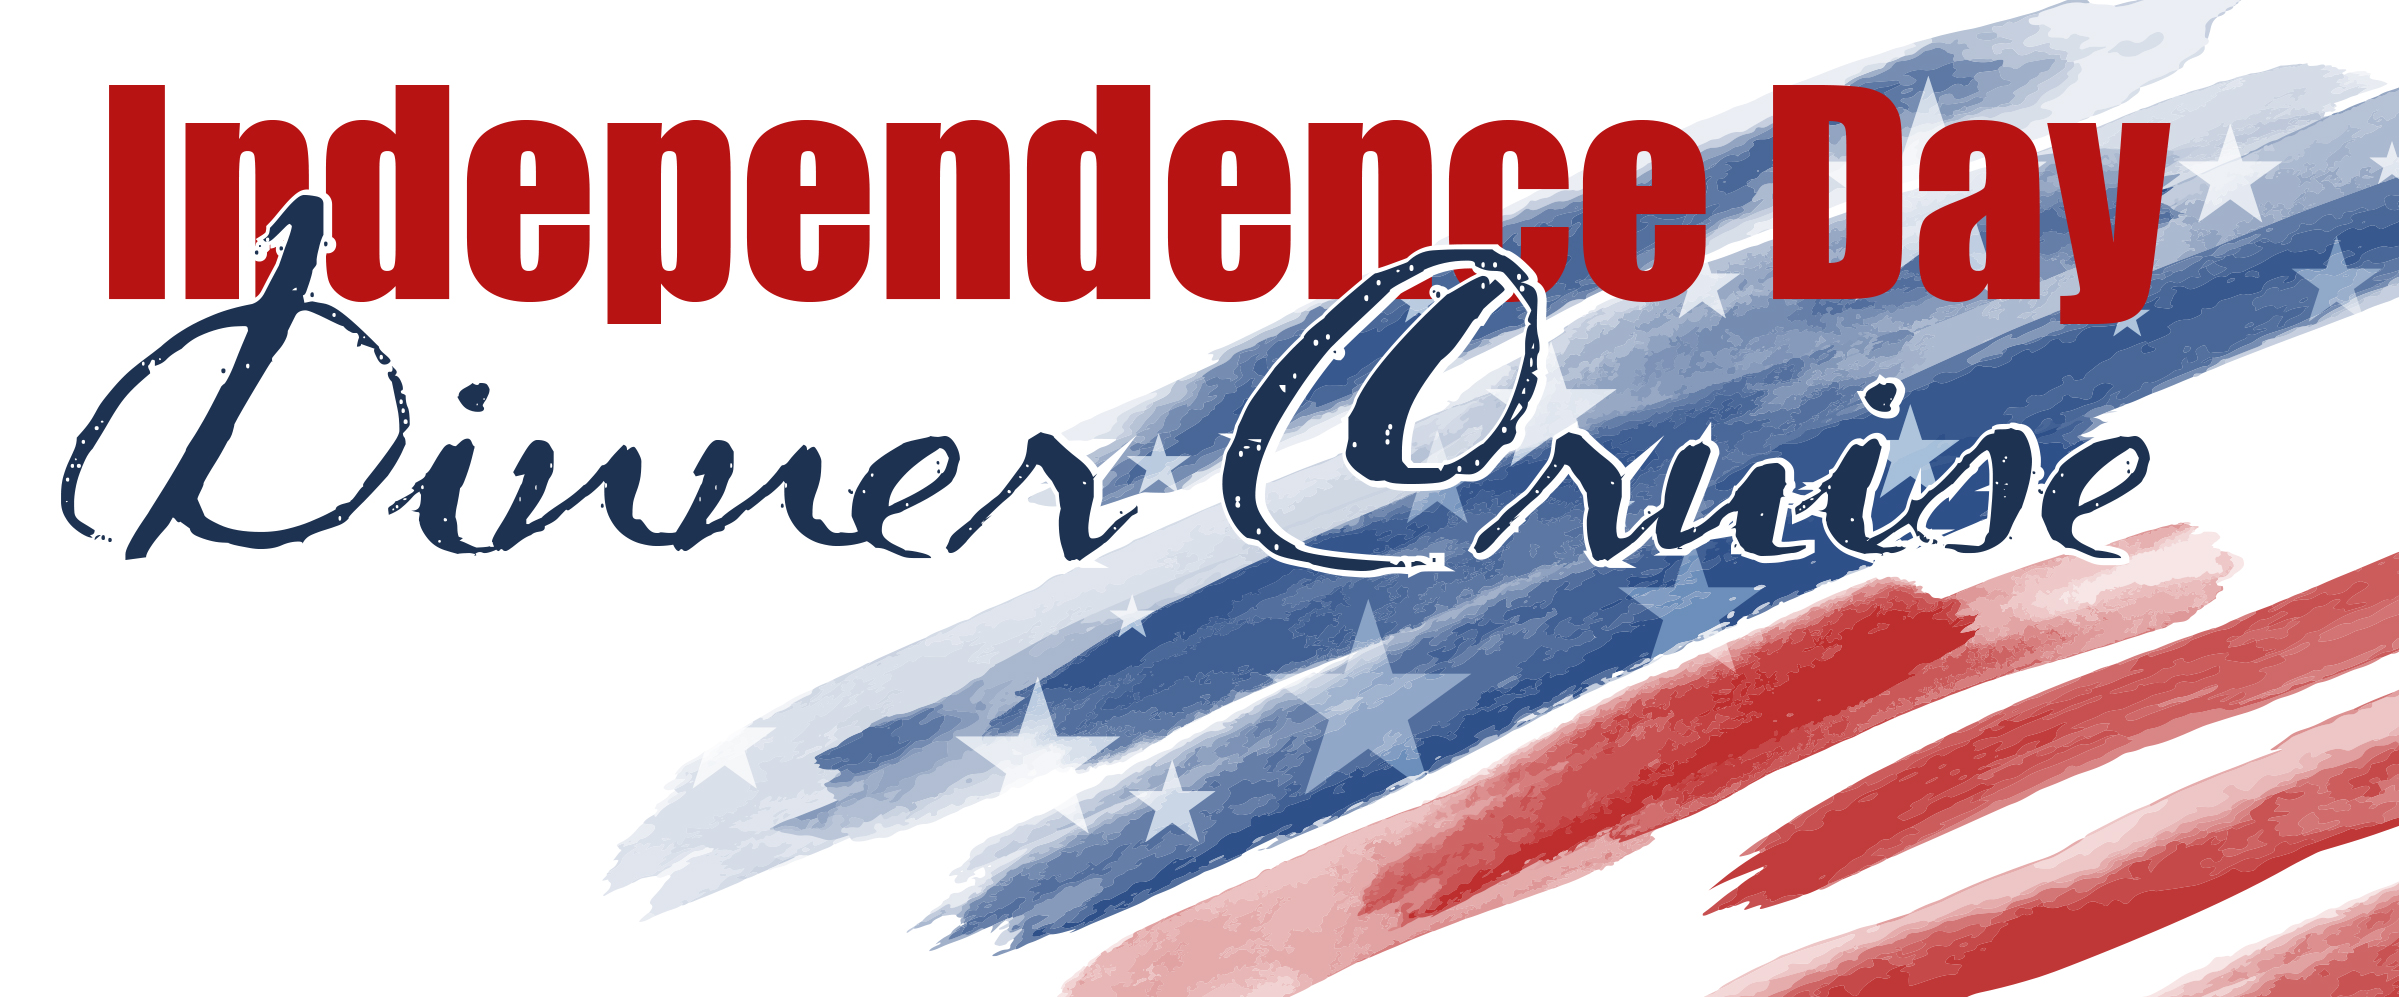 Independence Day Dinner Cruise